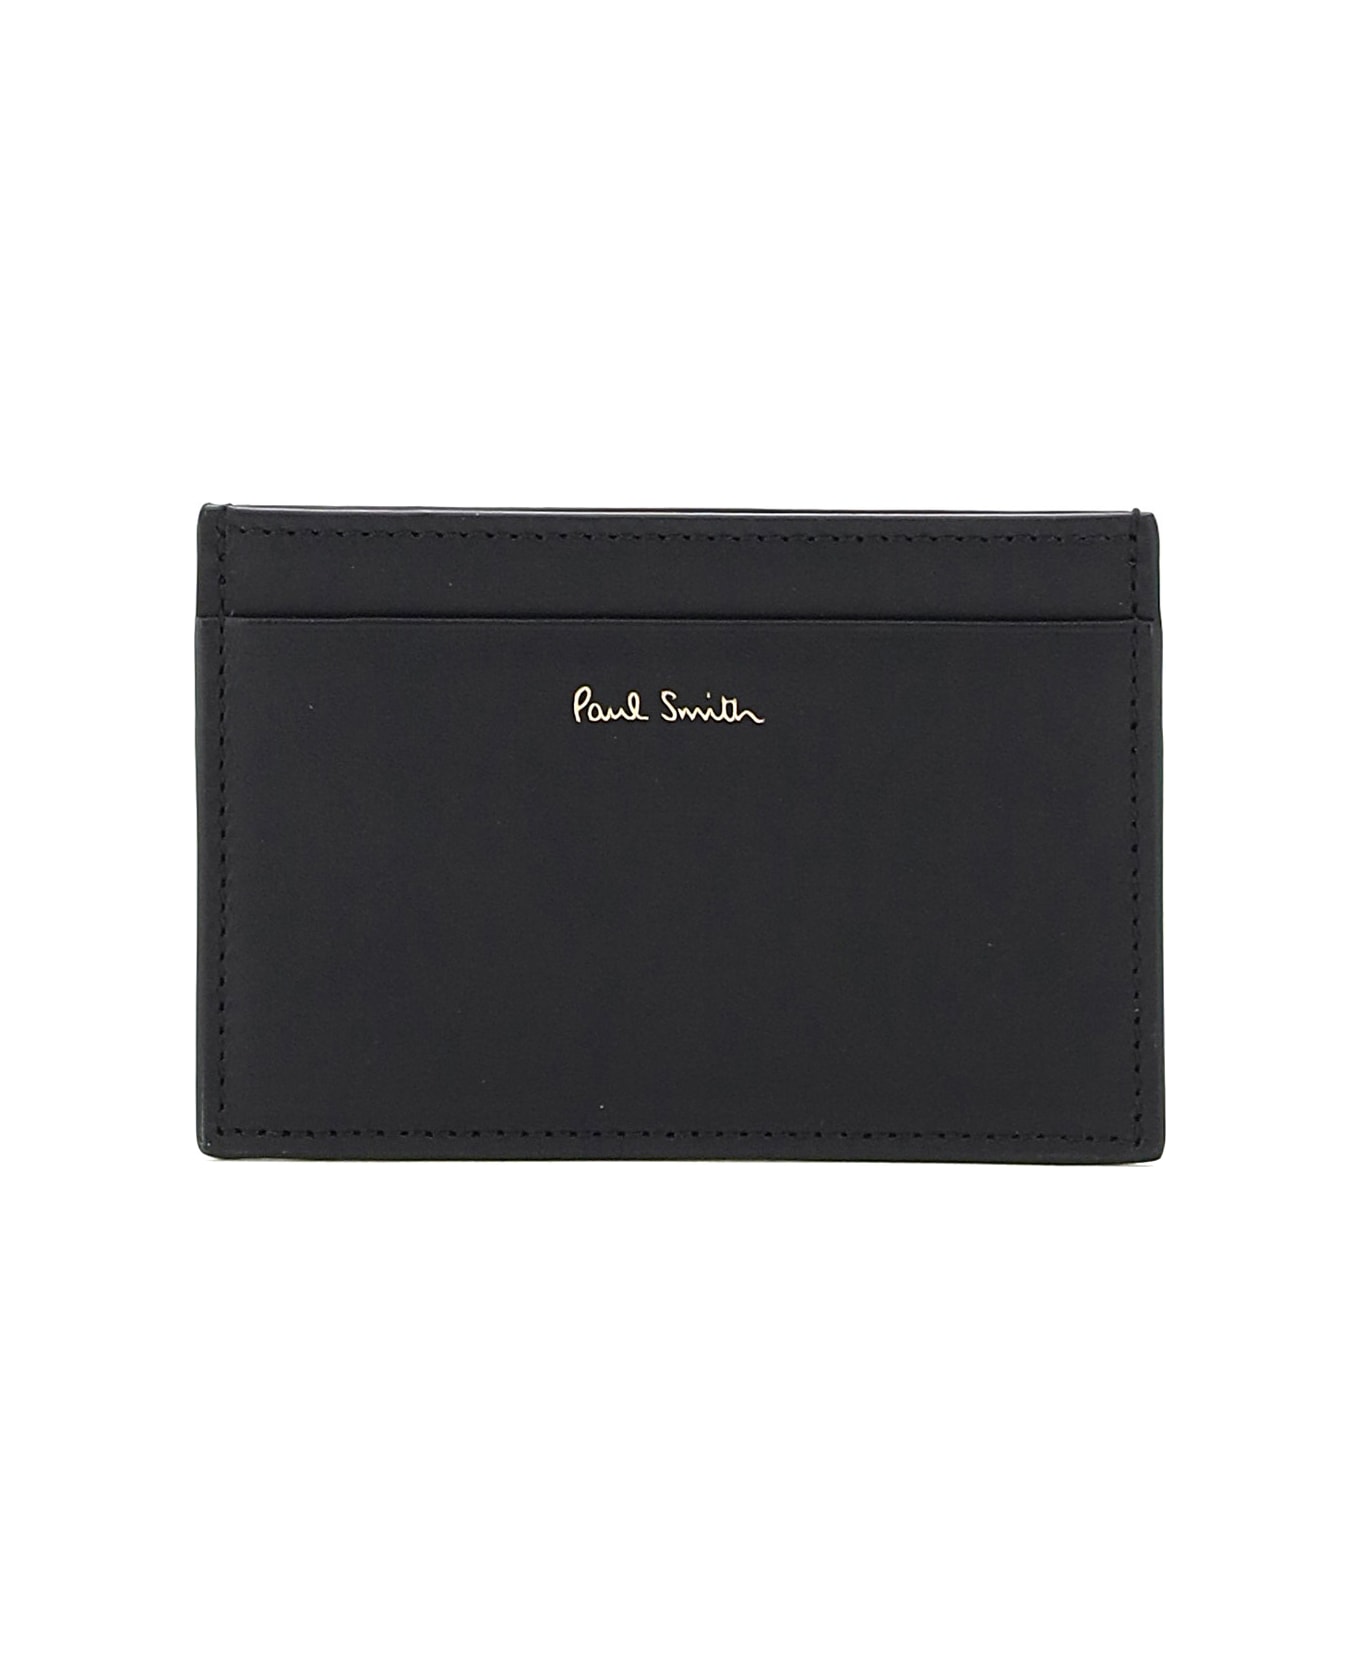 Paul Smith Striped Card Holder - BLACK/RED 財布